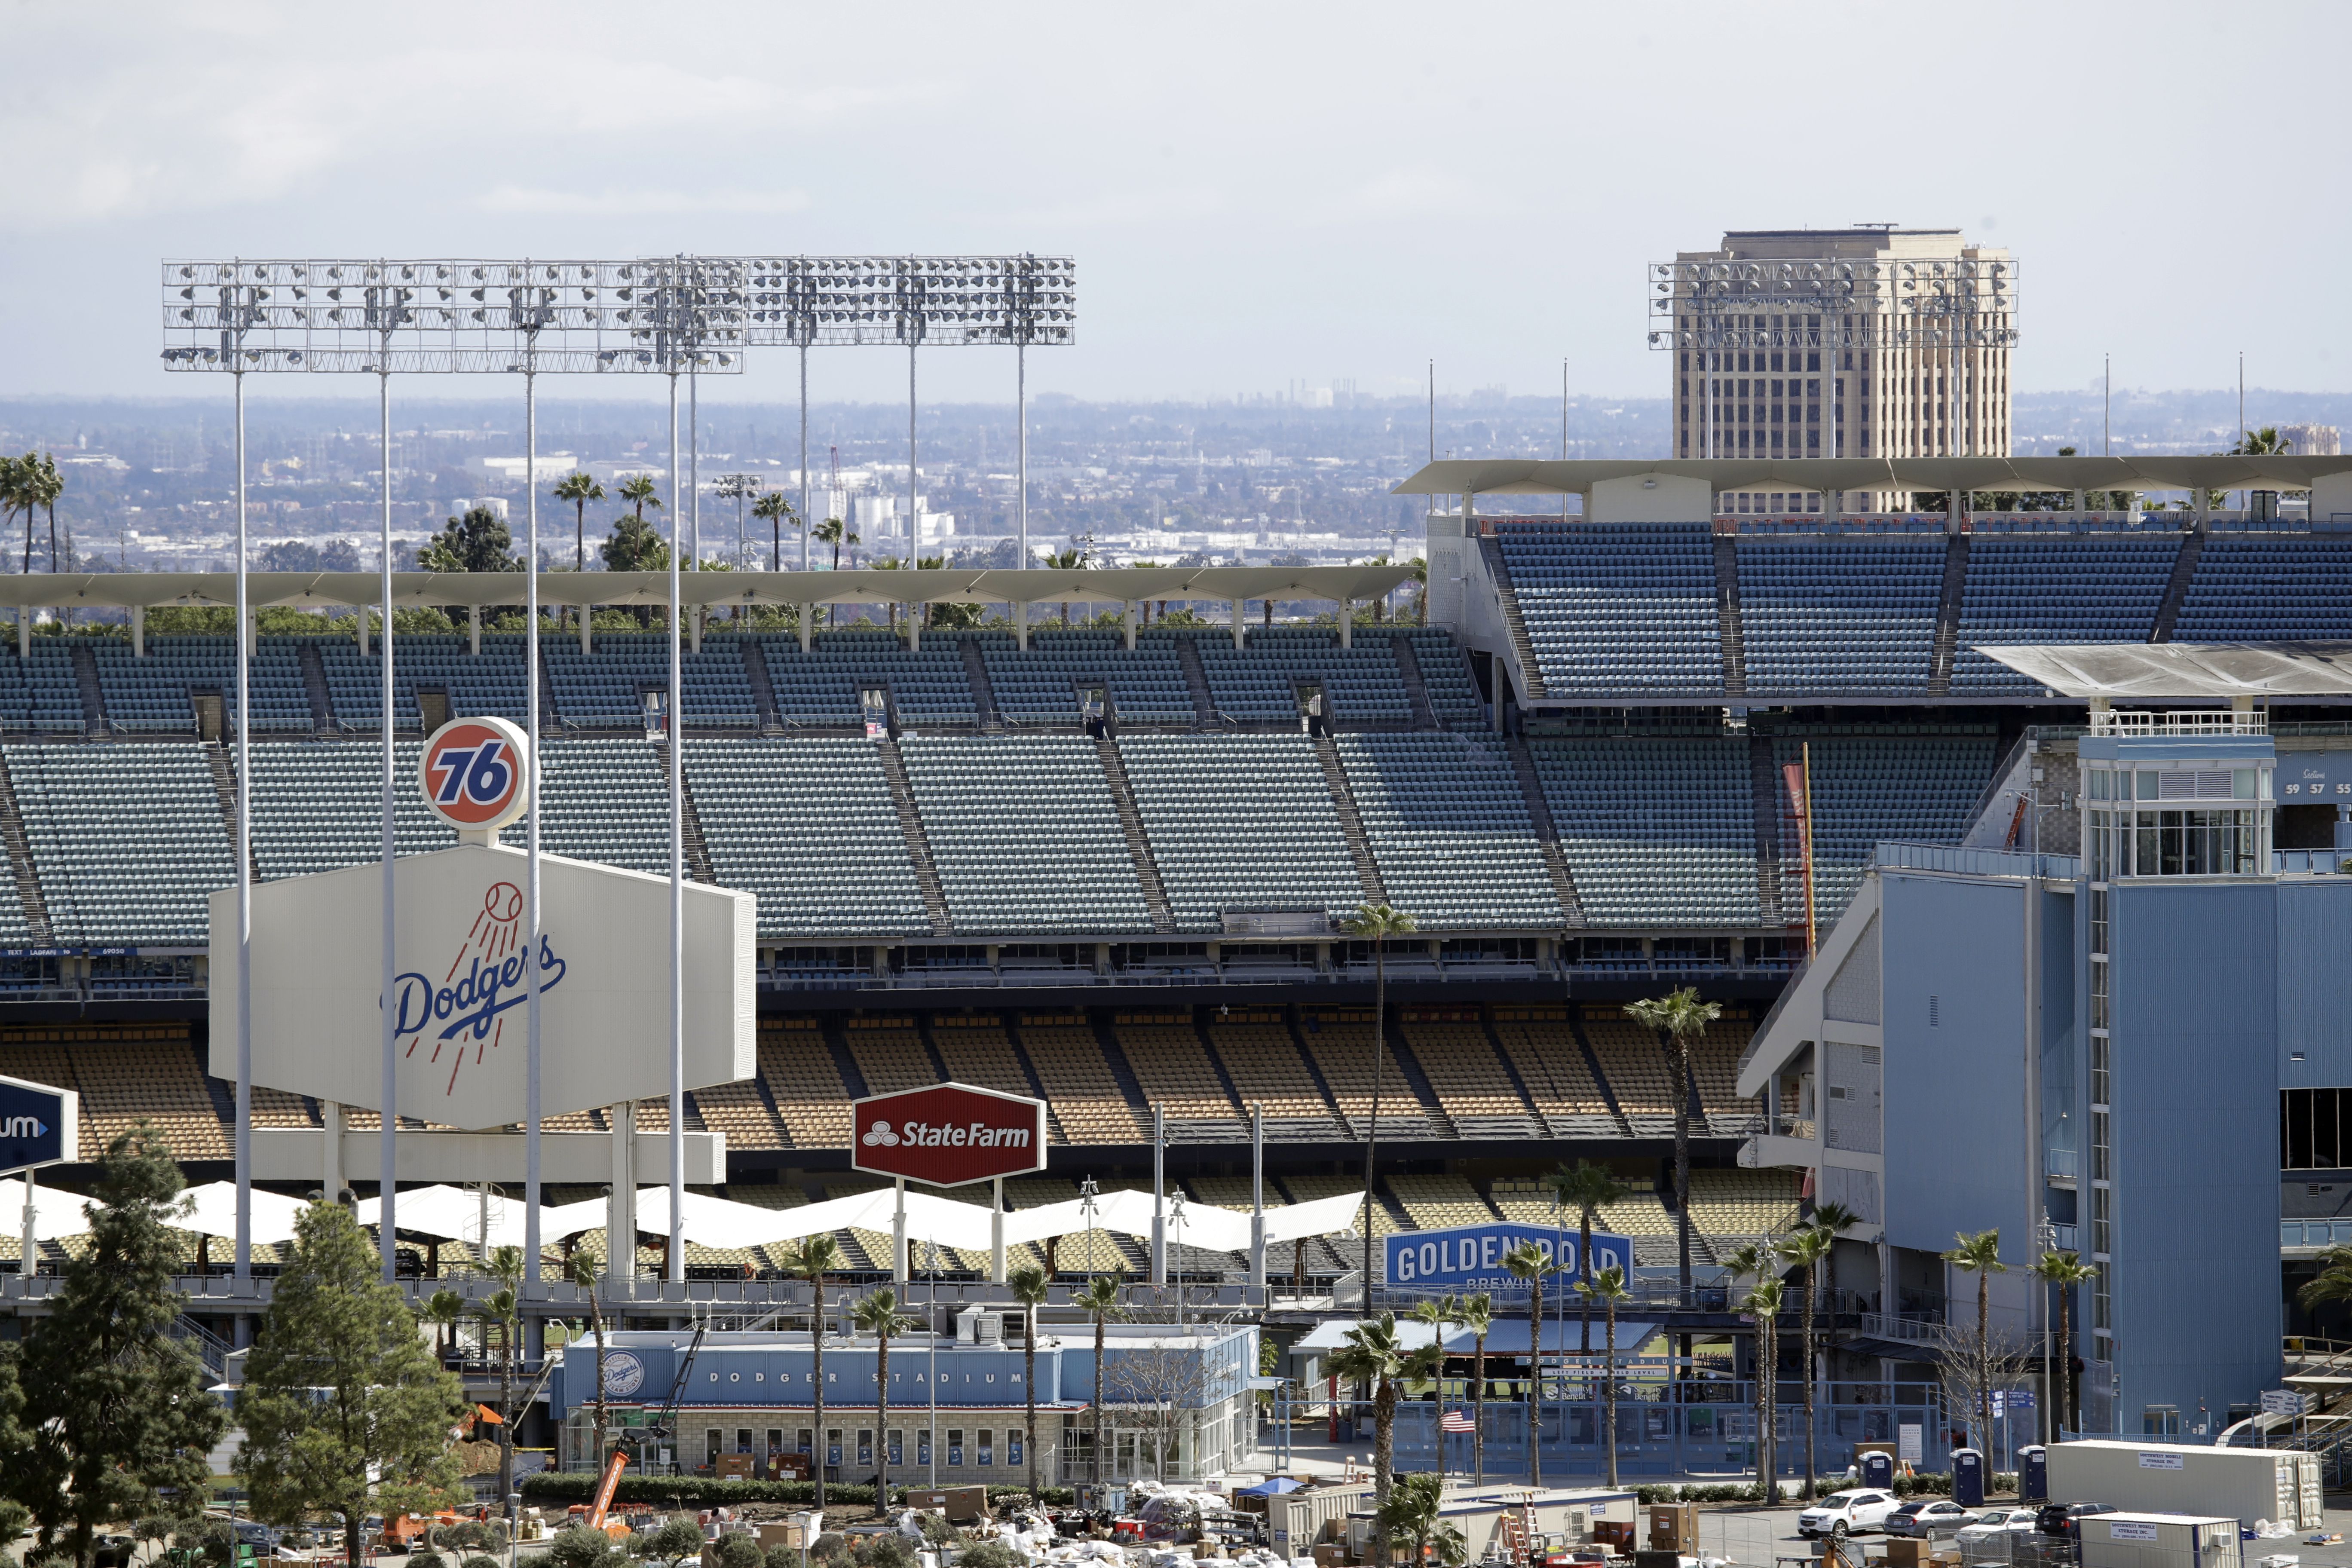 Dodger Stadium was supposed to host the 2020 MLB All-Star Game on